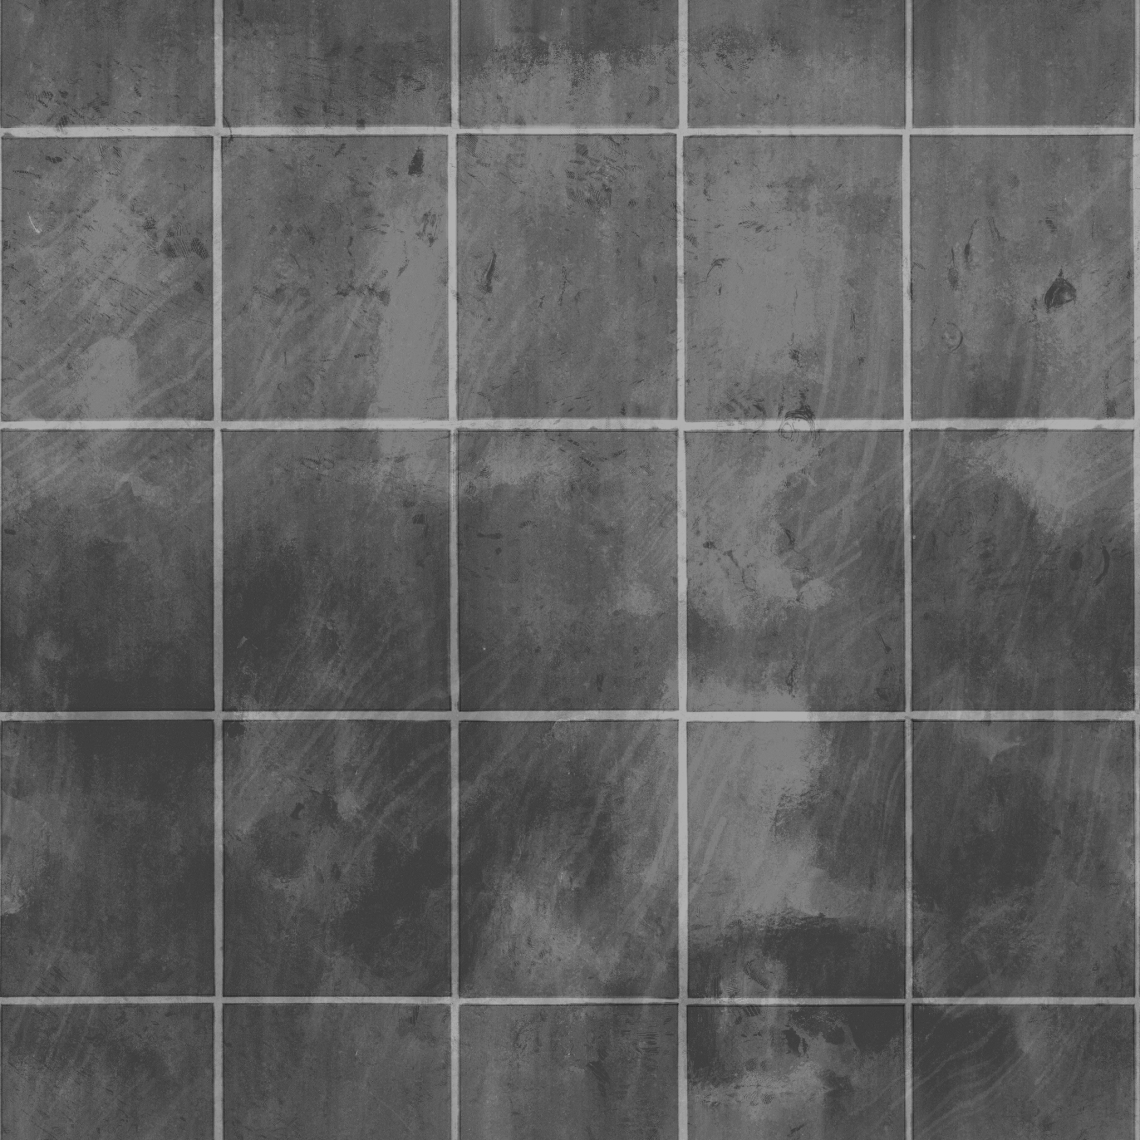 Simple-Tiles-01-Roughness - Seamless